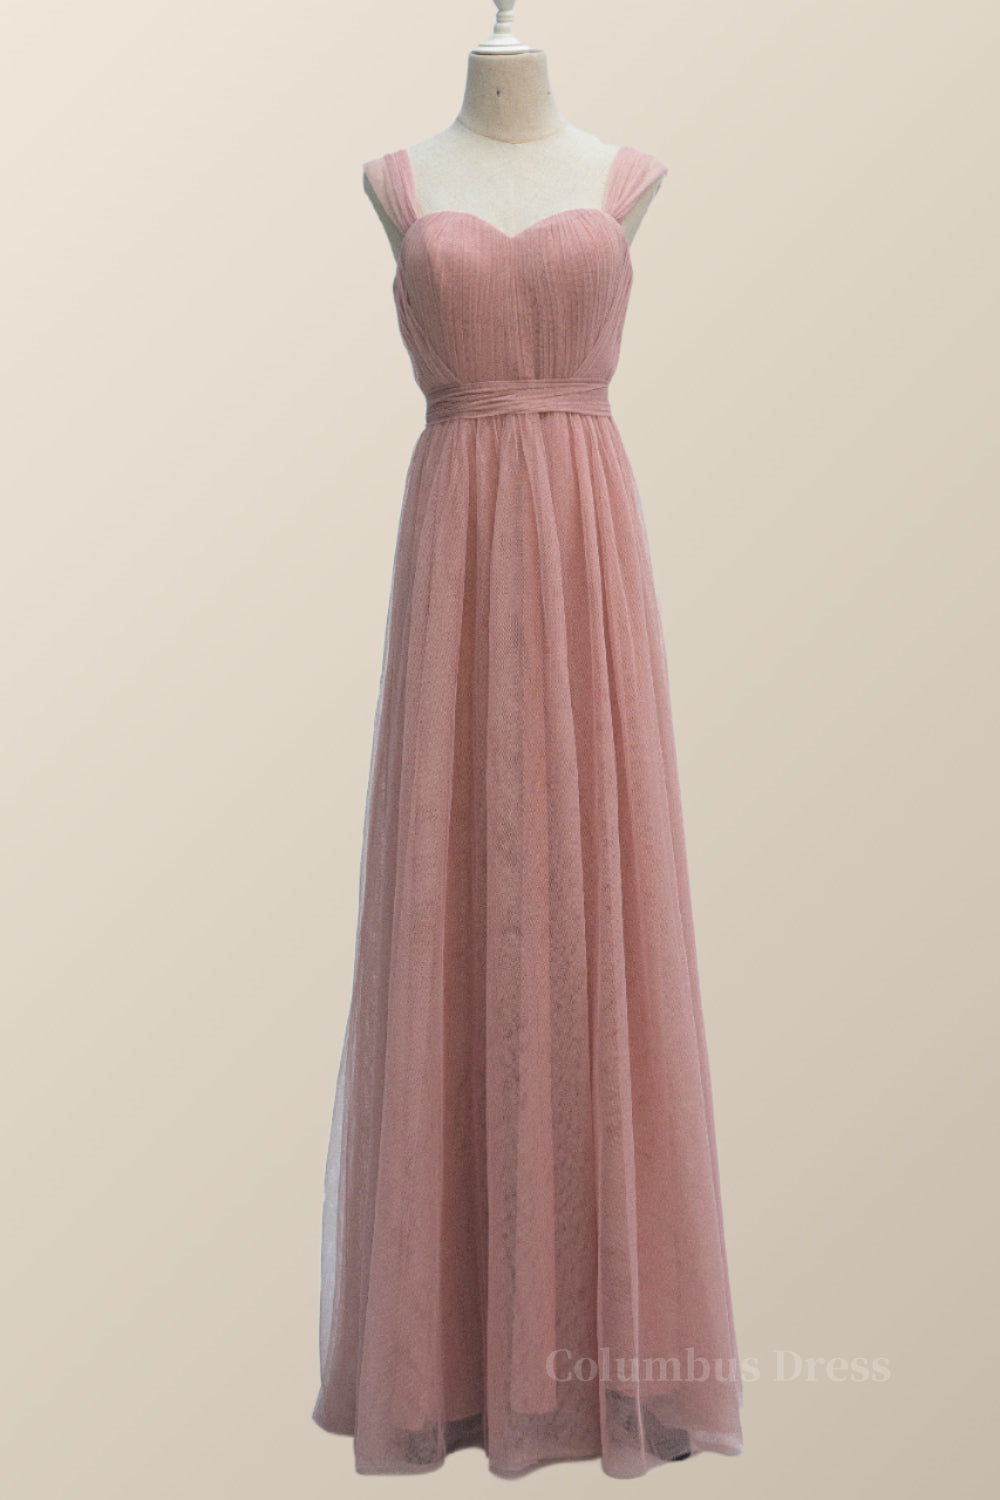 Empire Blush Pink Tulle A-line Long Corset Bridesmaid Dress outfit, Lace Dress